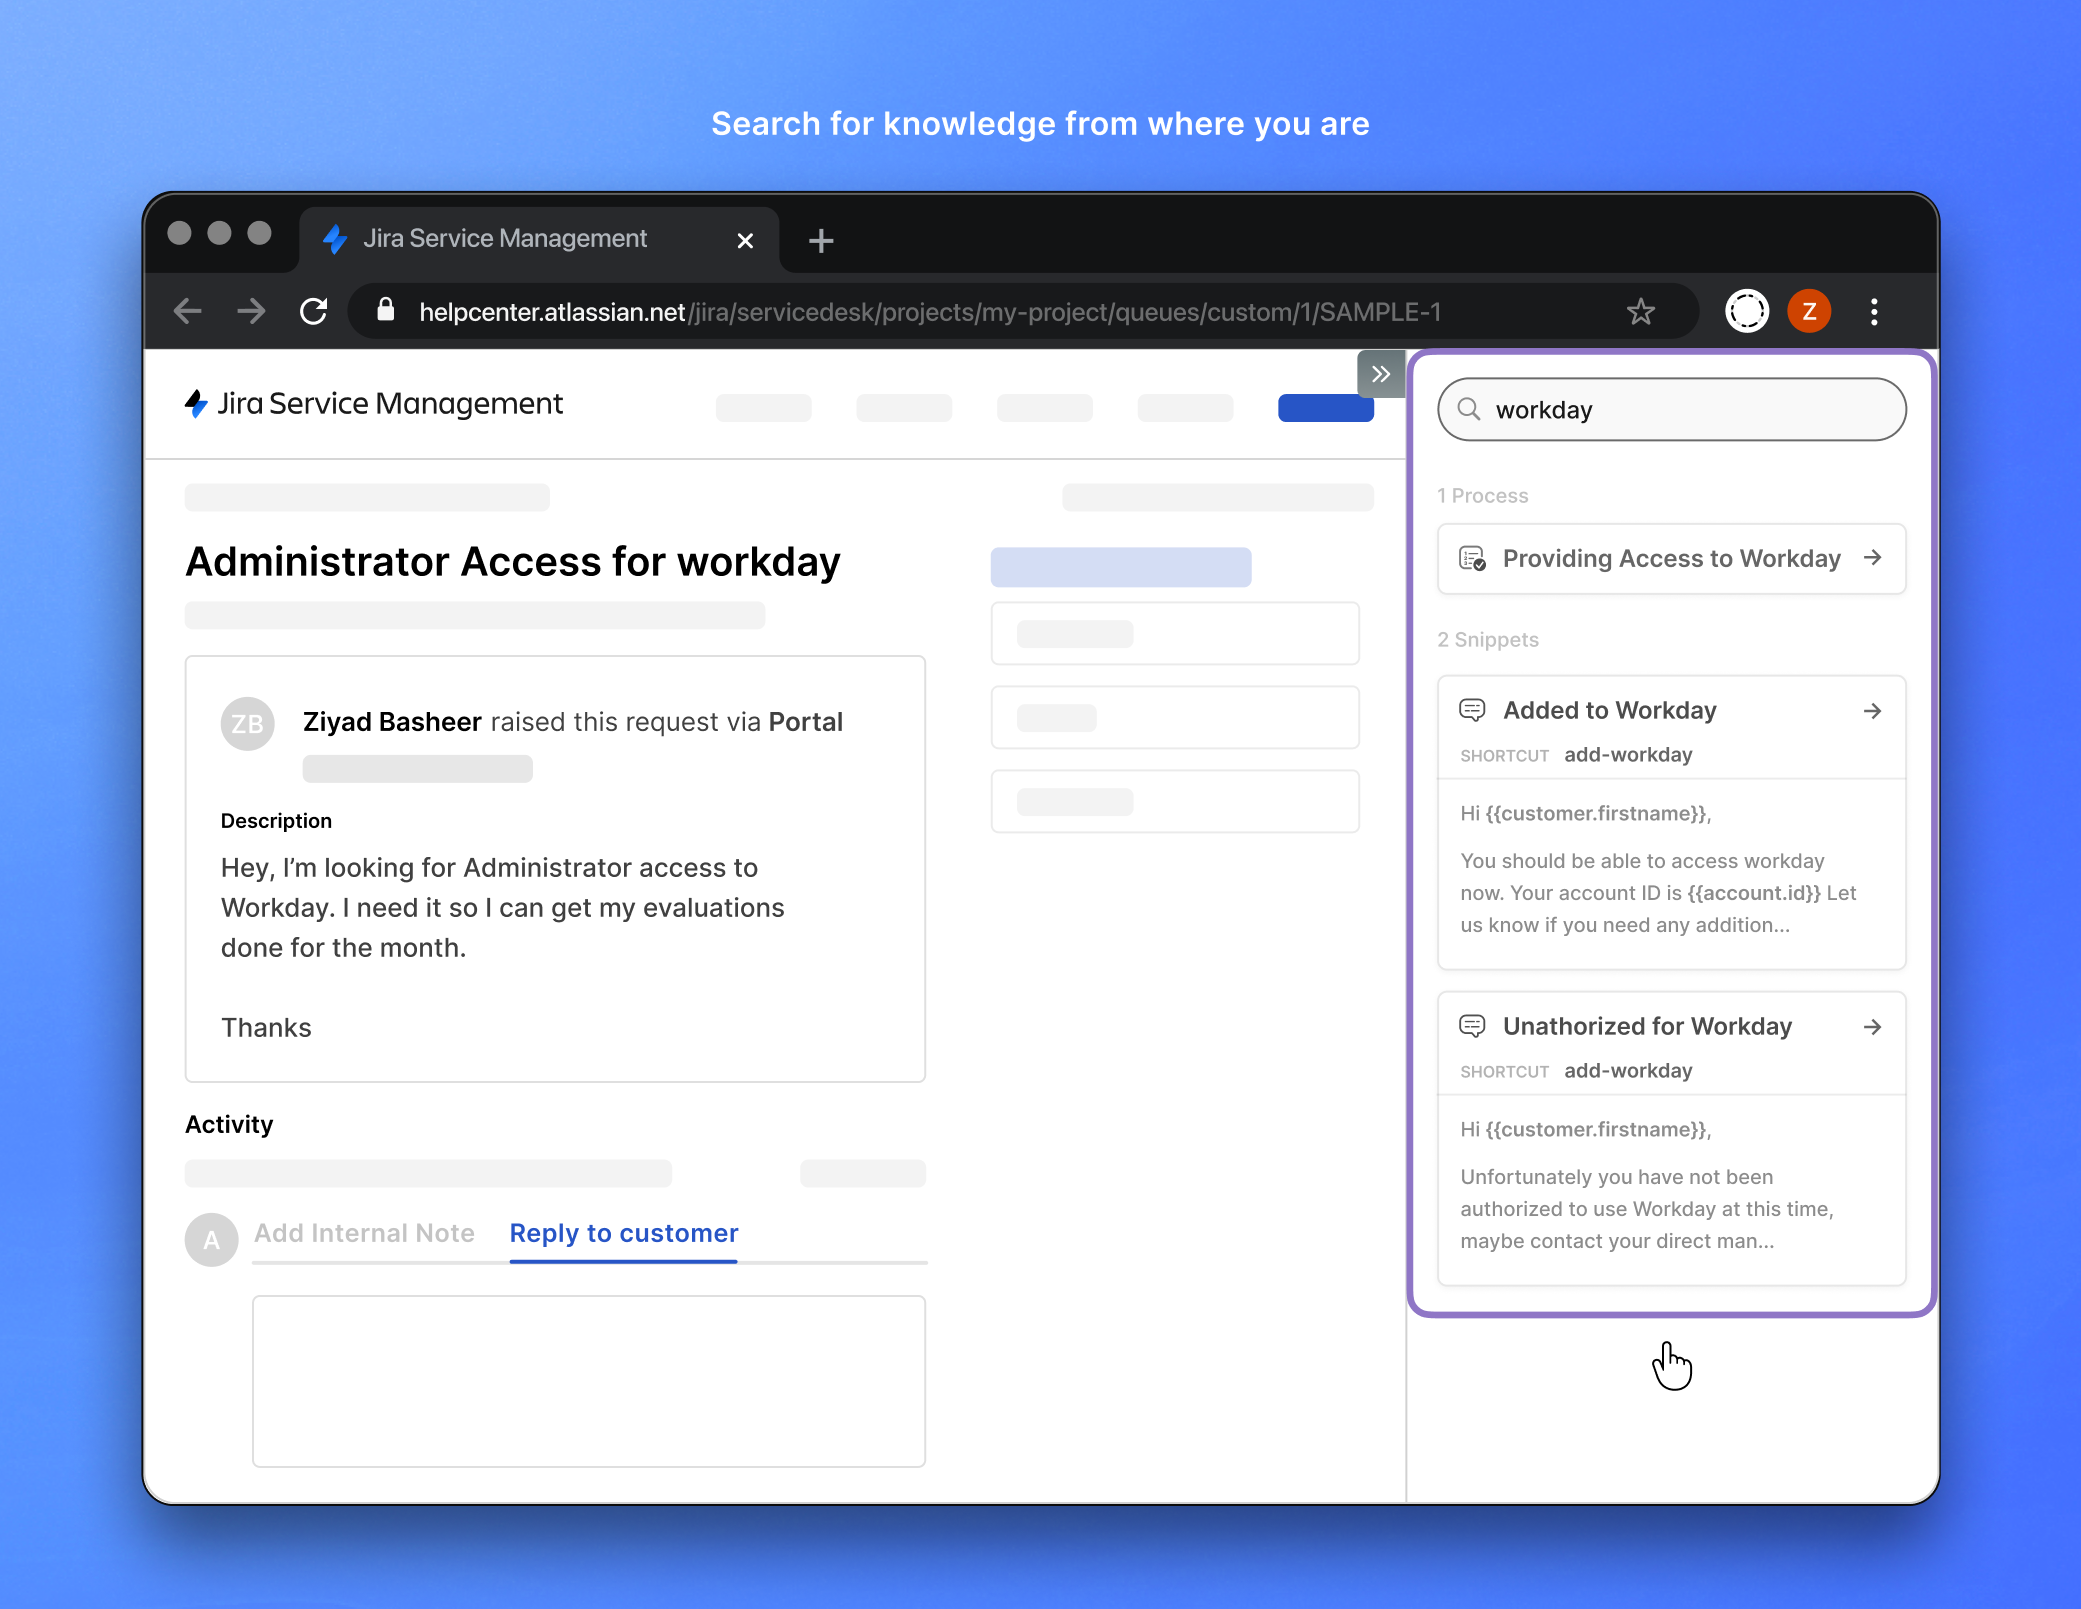 Chrome Knowledge Search